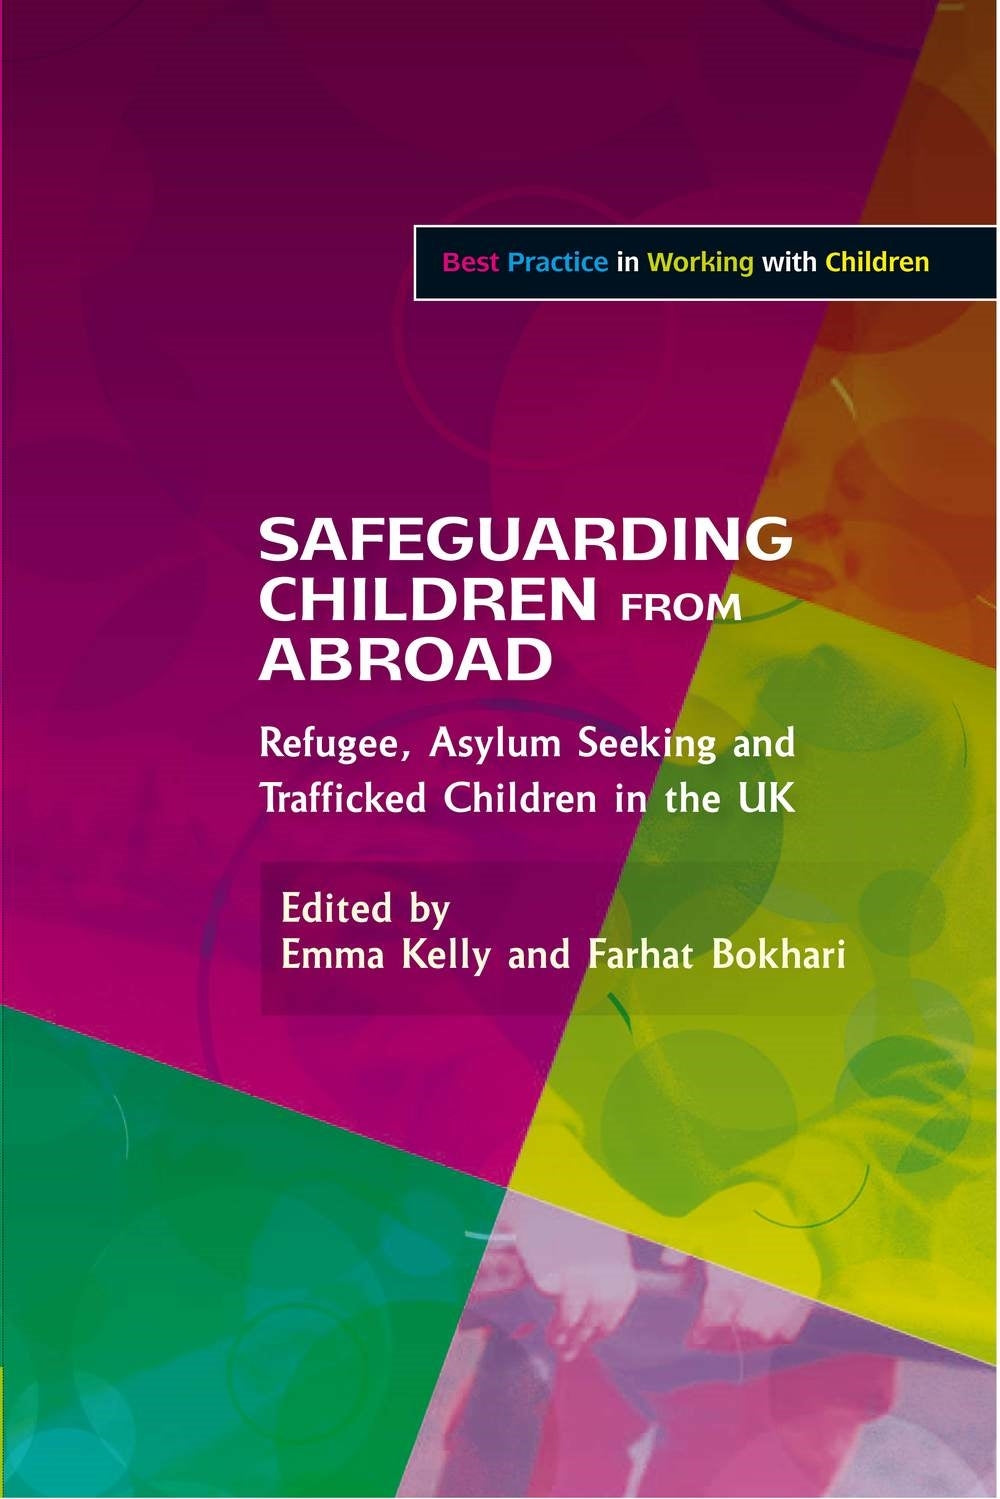 Safeguarding Children from Abroad by Emma Kelly, Farhat Bokhari